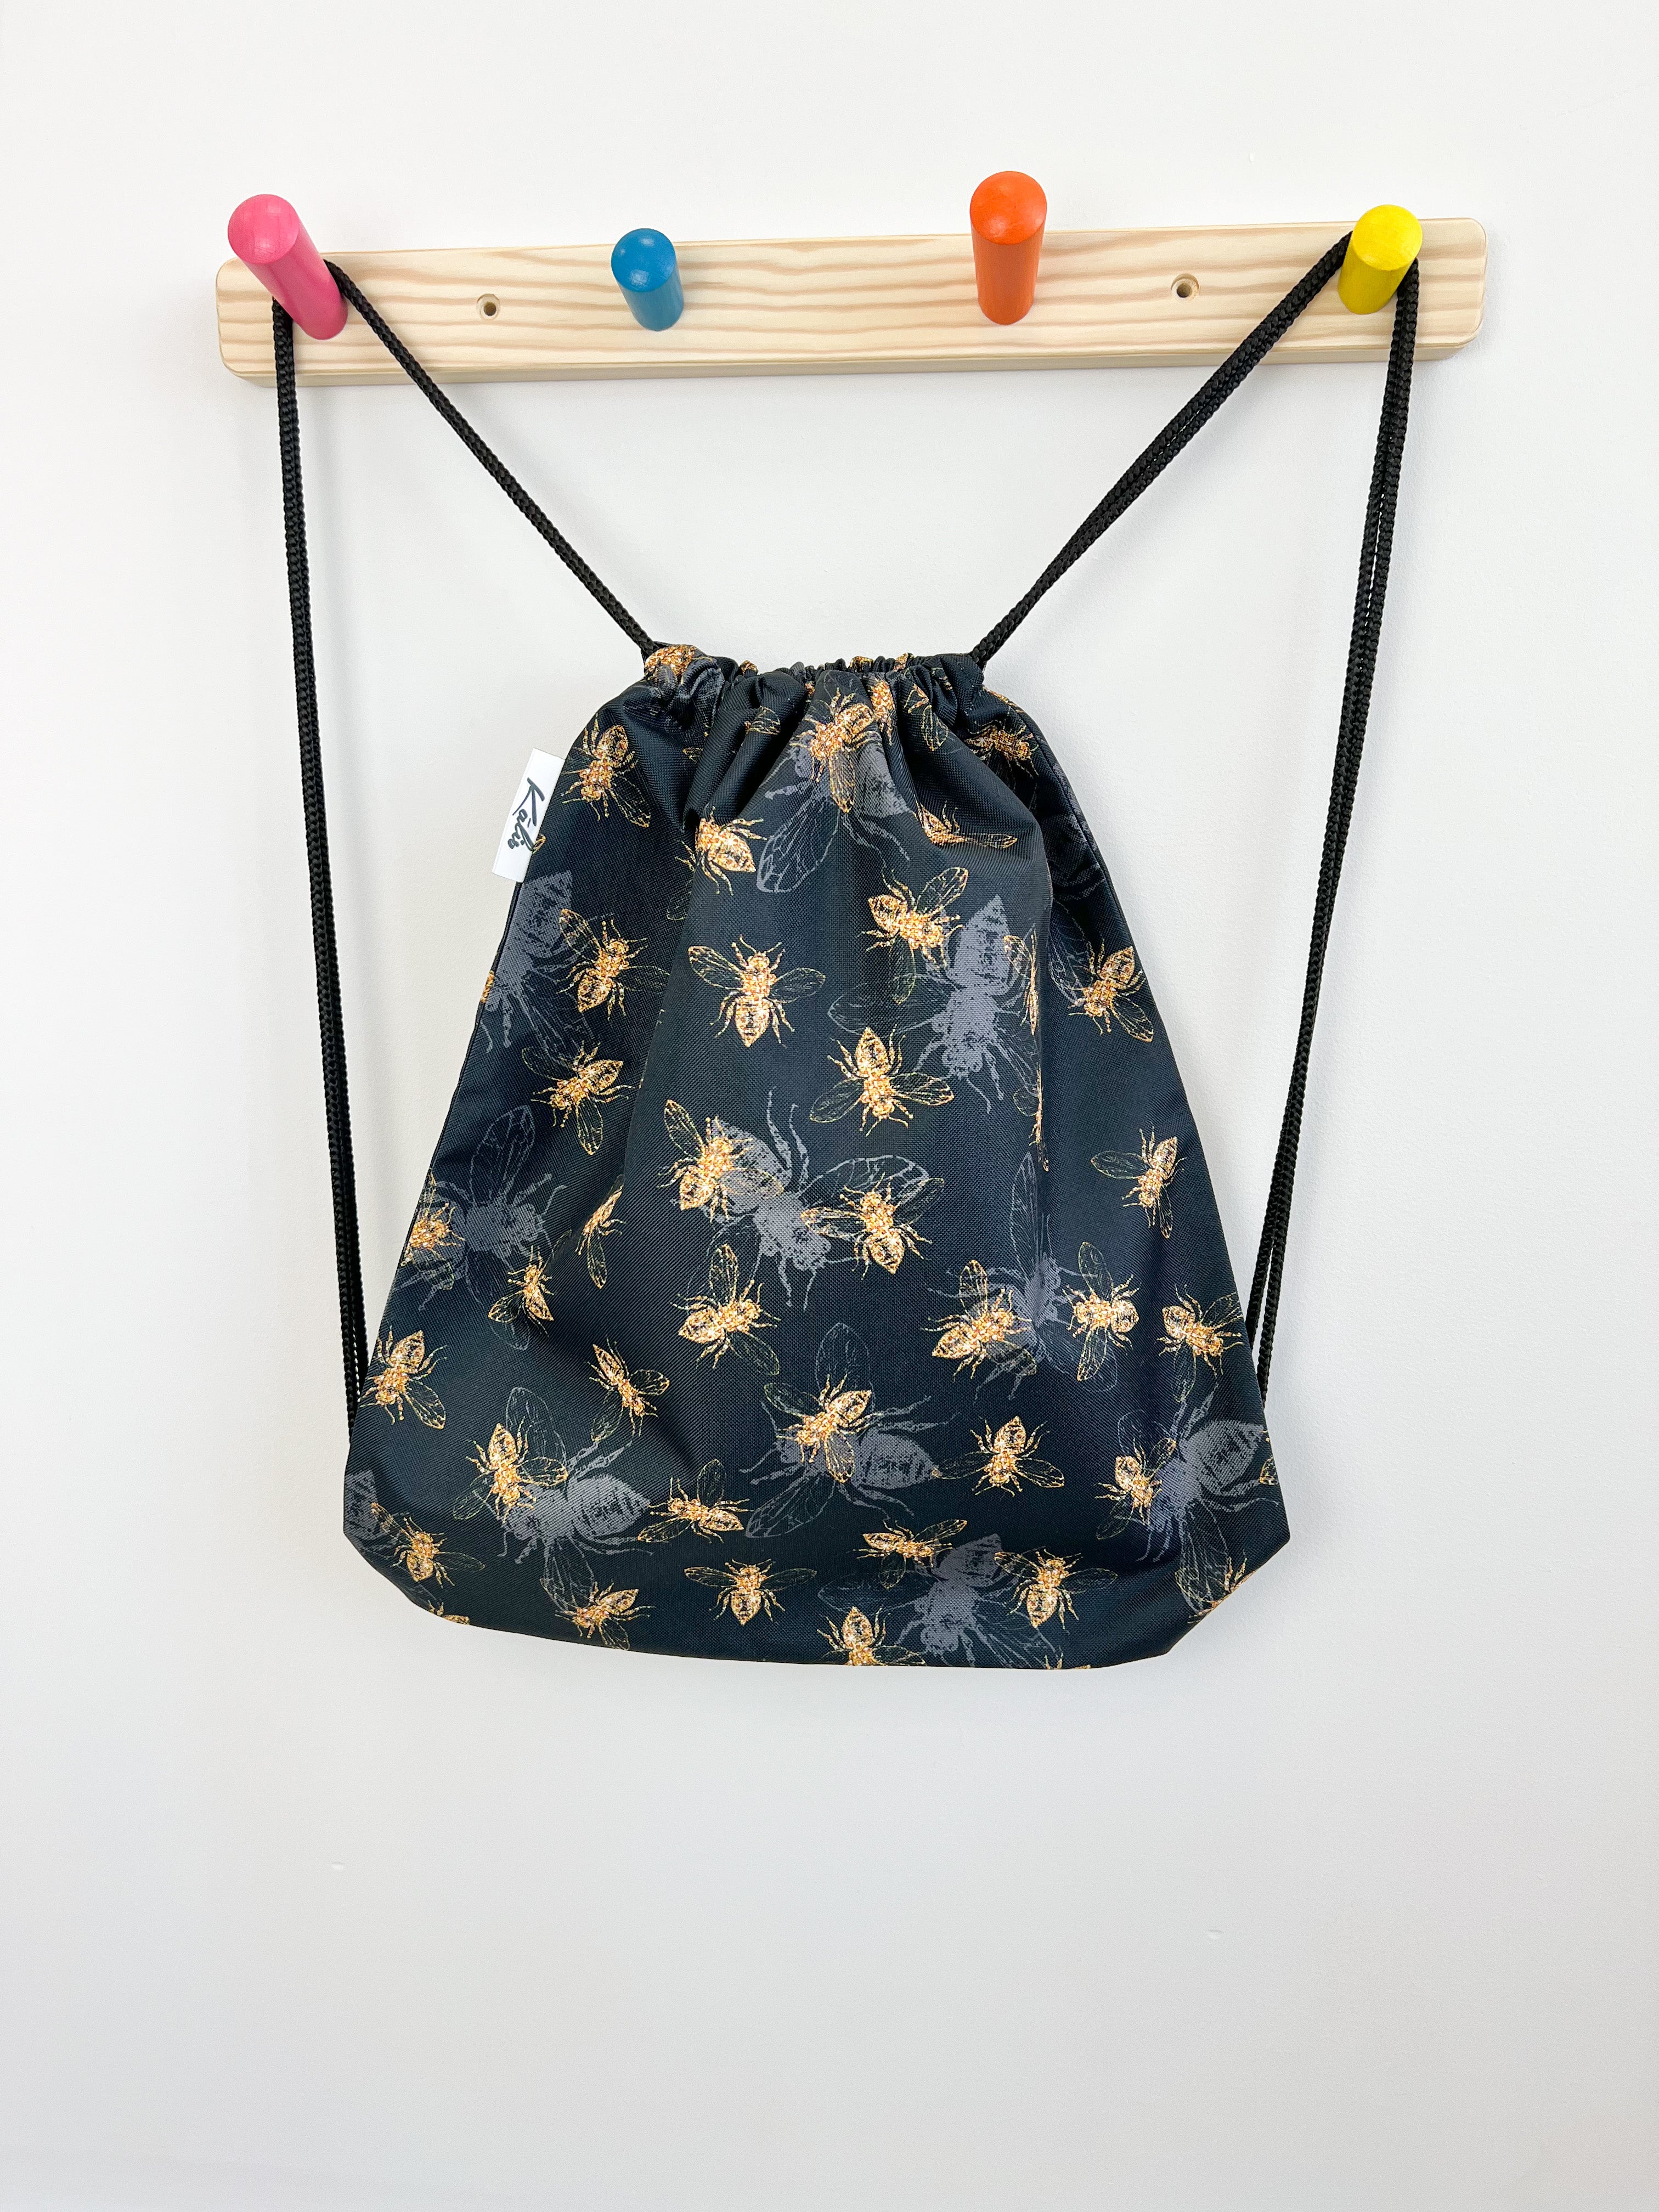 Sports Bag "Insects"